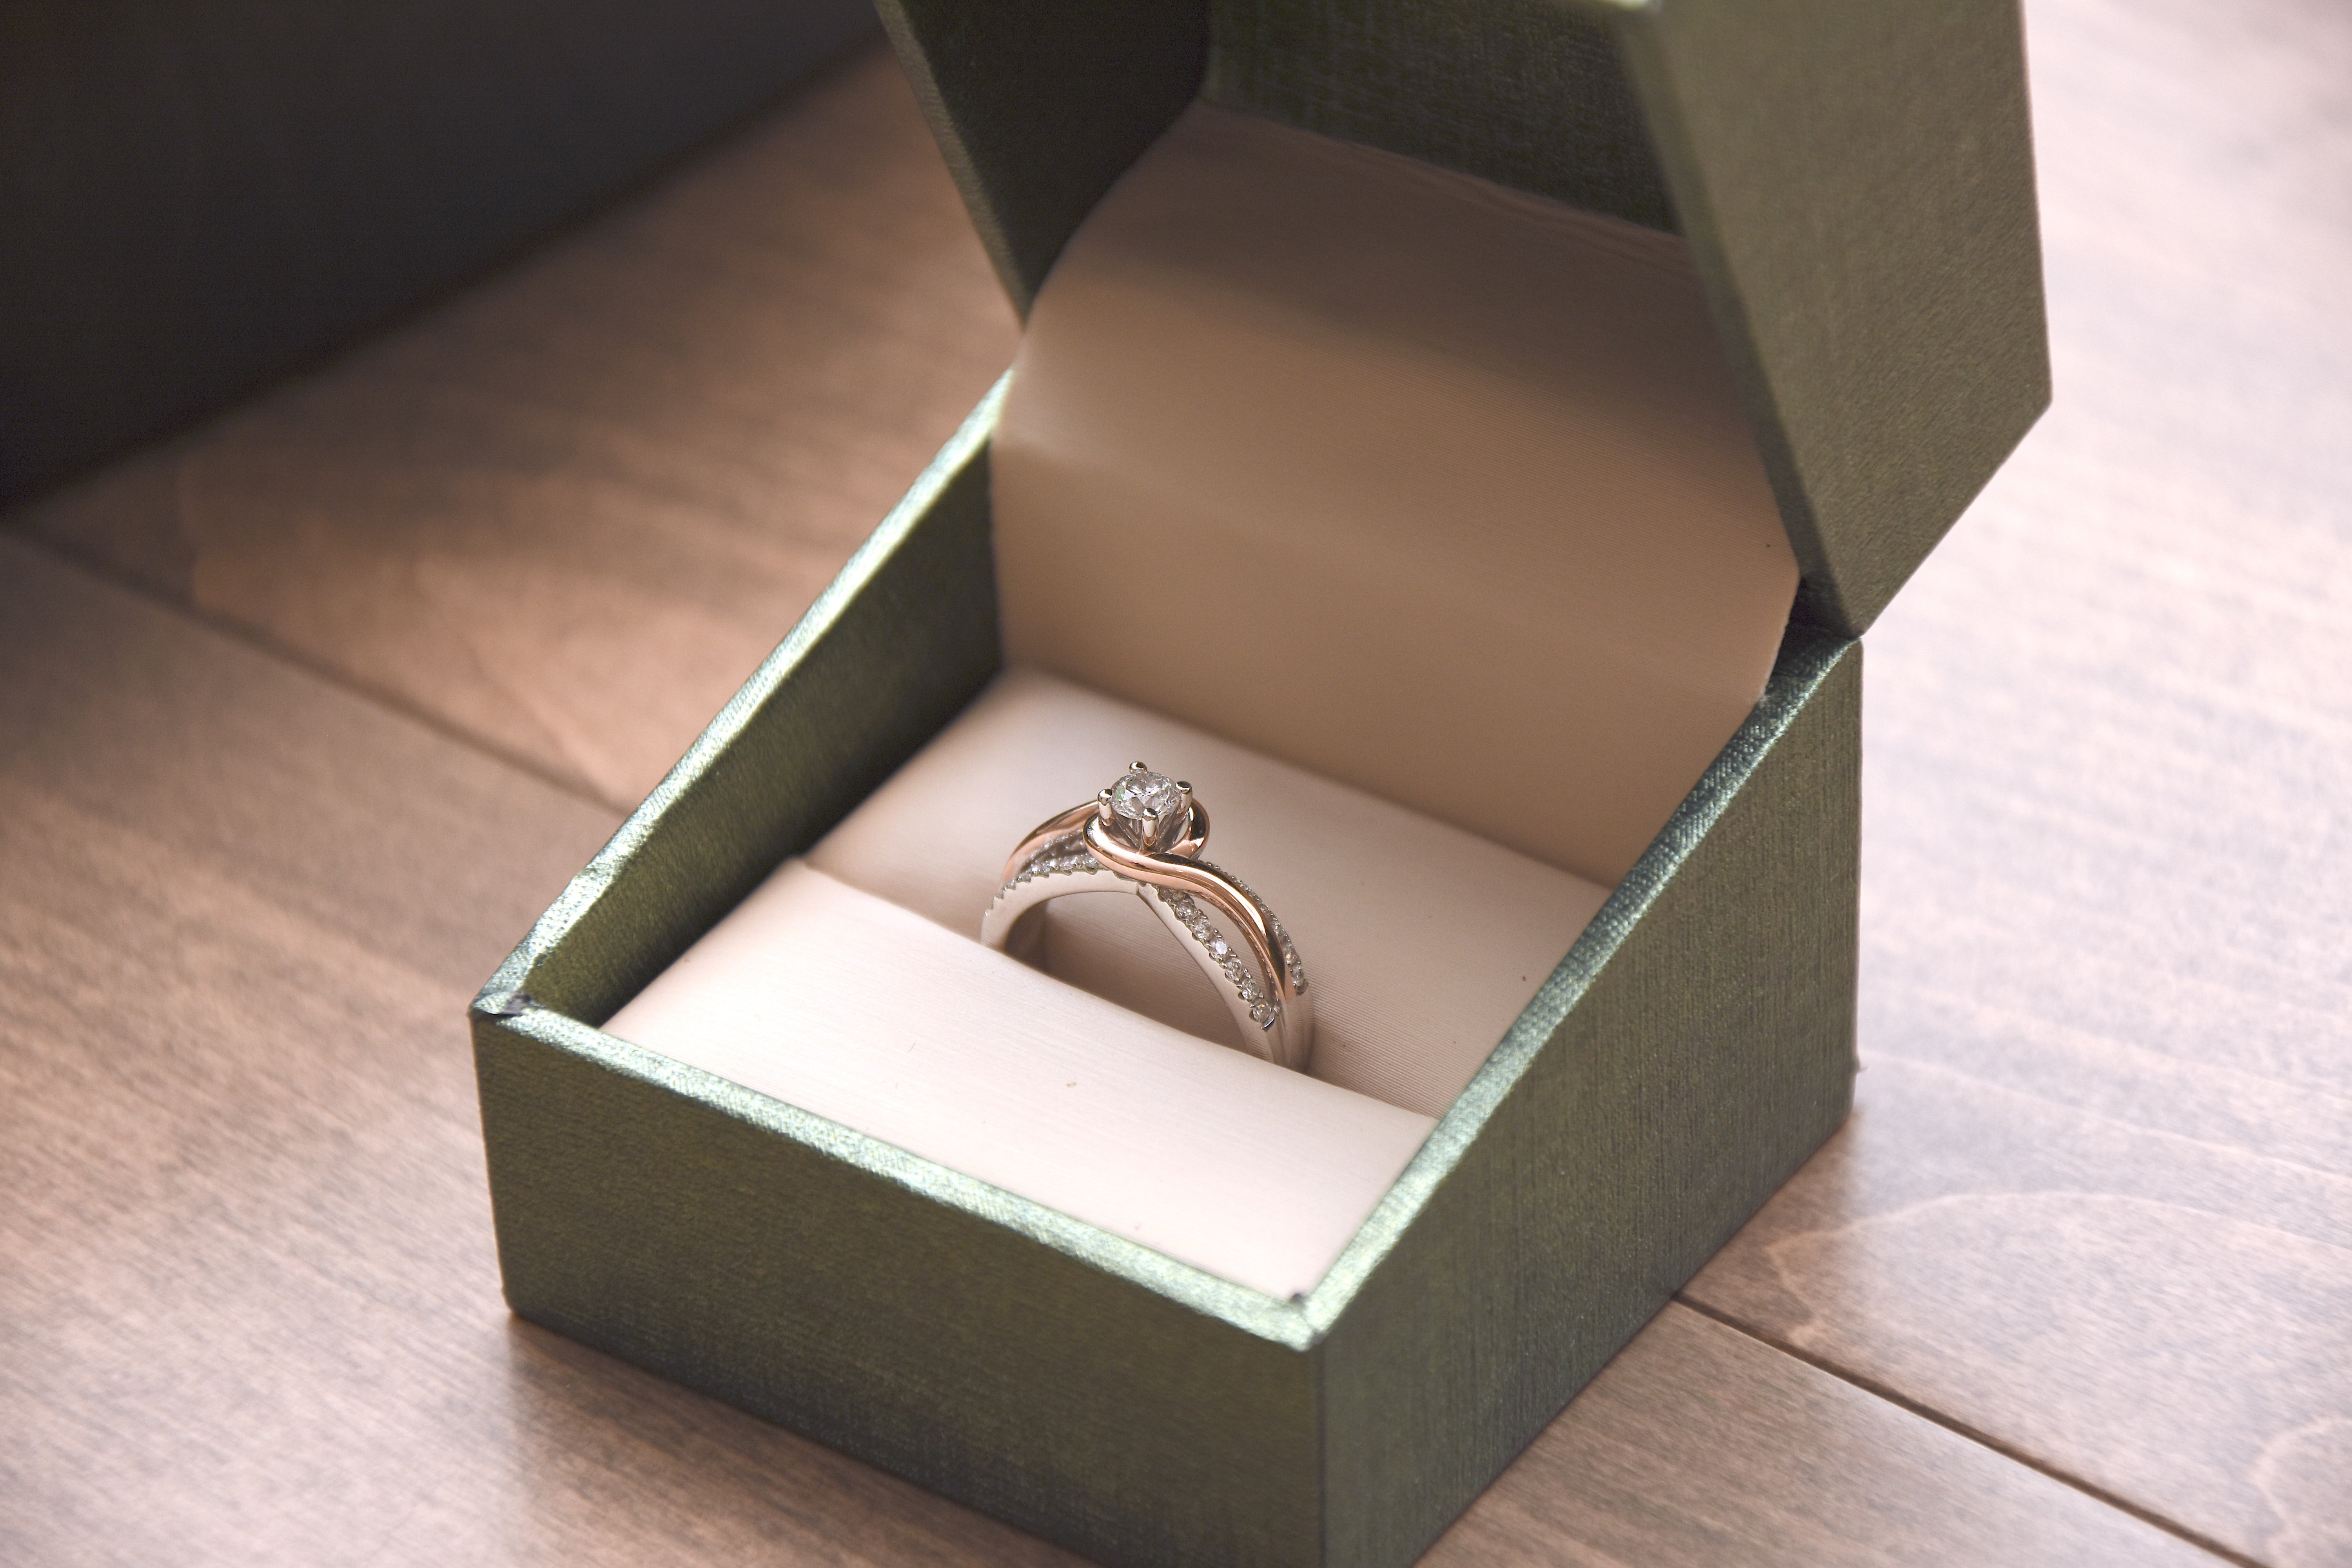 Close-up view of an engagement ring in a box  | Photo: Unsplash